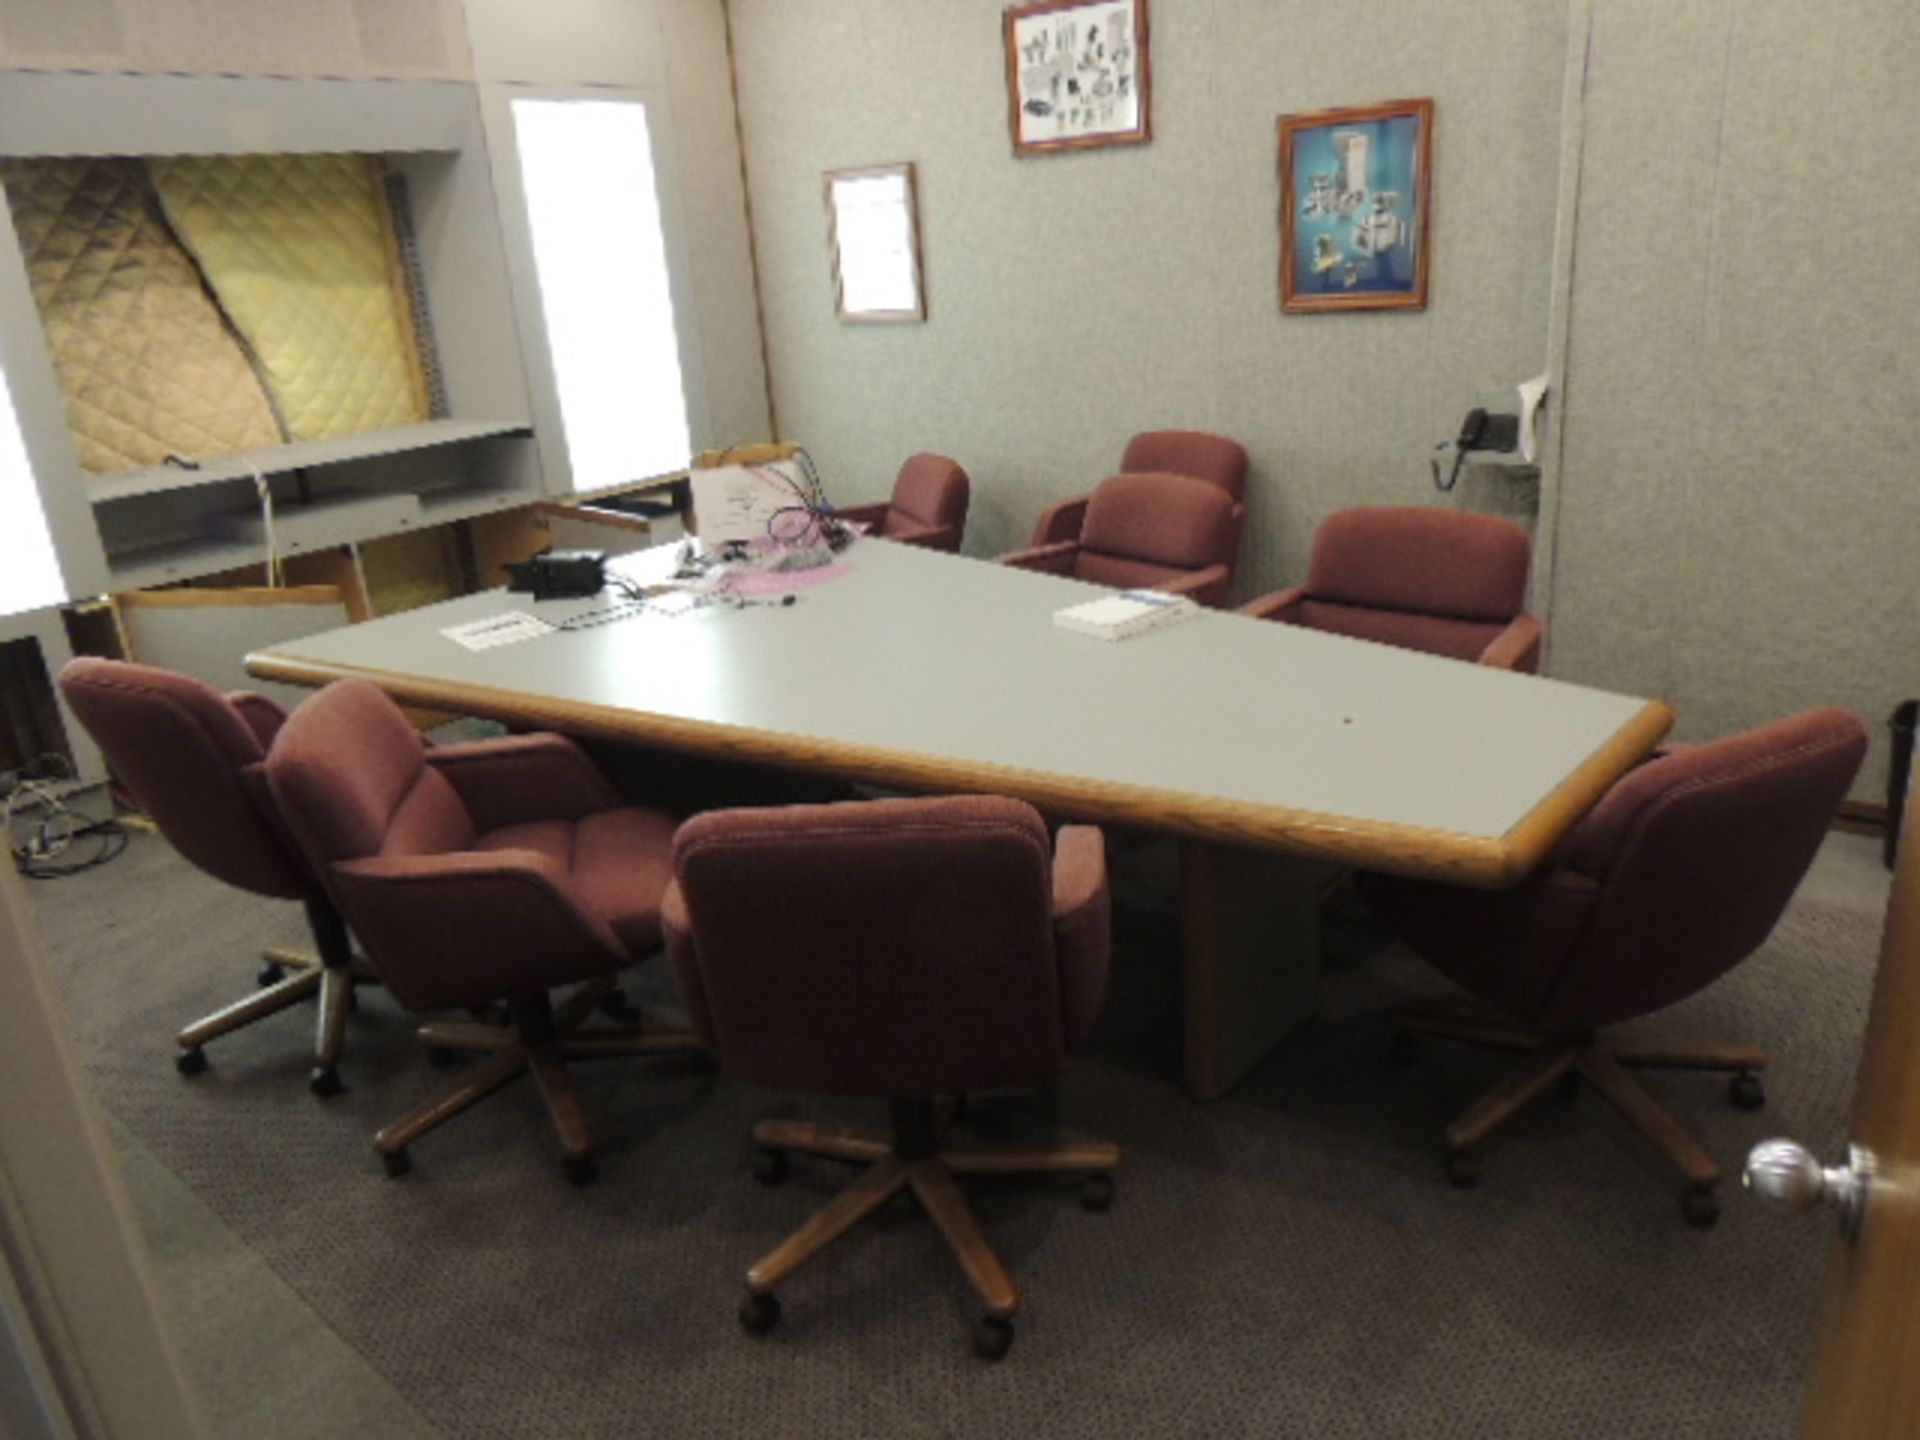 Office Cubicles & Contents. Lot: (3) offices and contents, (4) cubicles 10'x15'x8' with desks and - Image 11 of 25